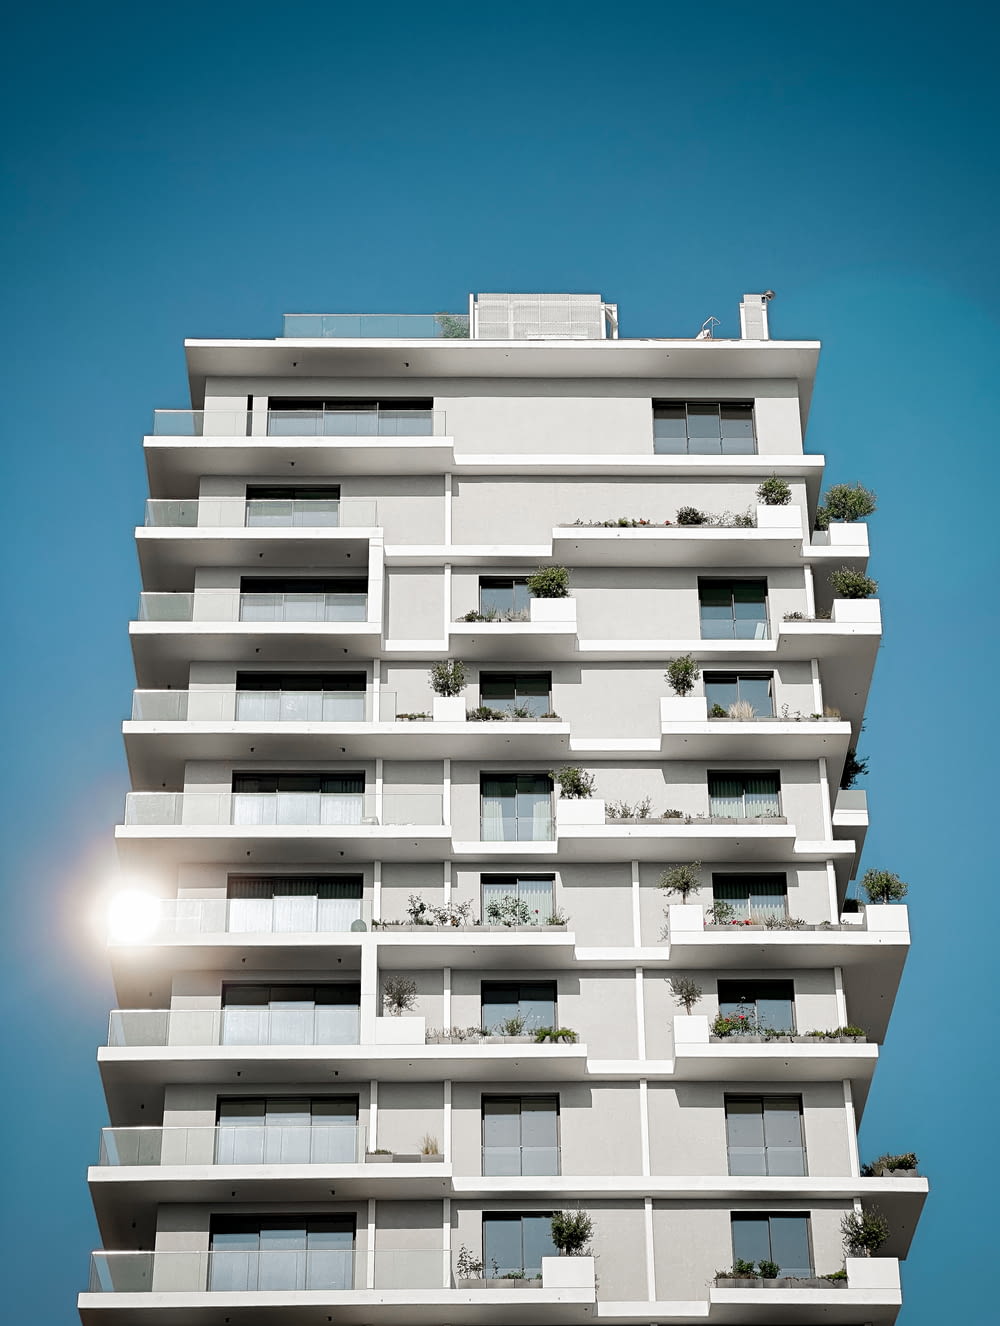 a tall white building with balconies and plants on the balconies